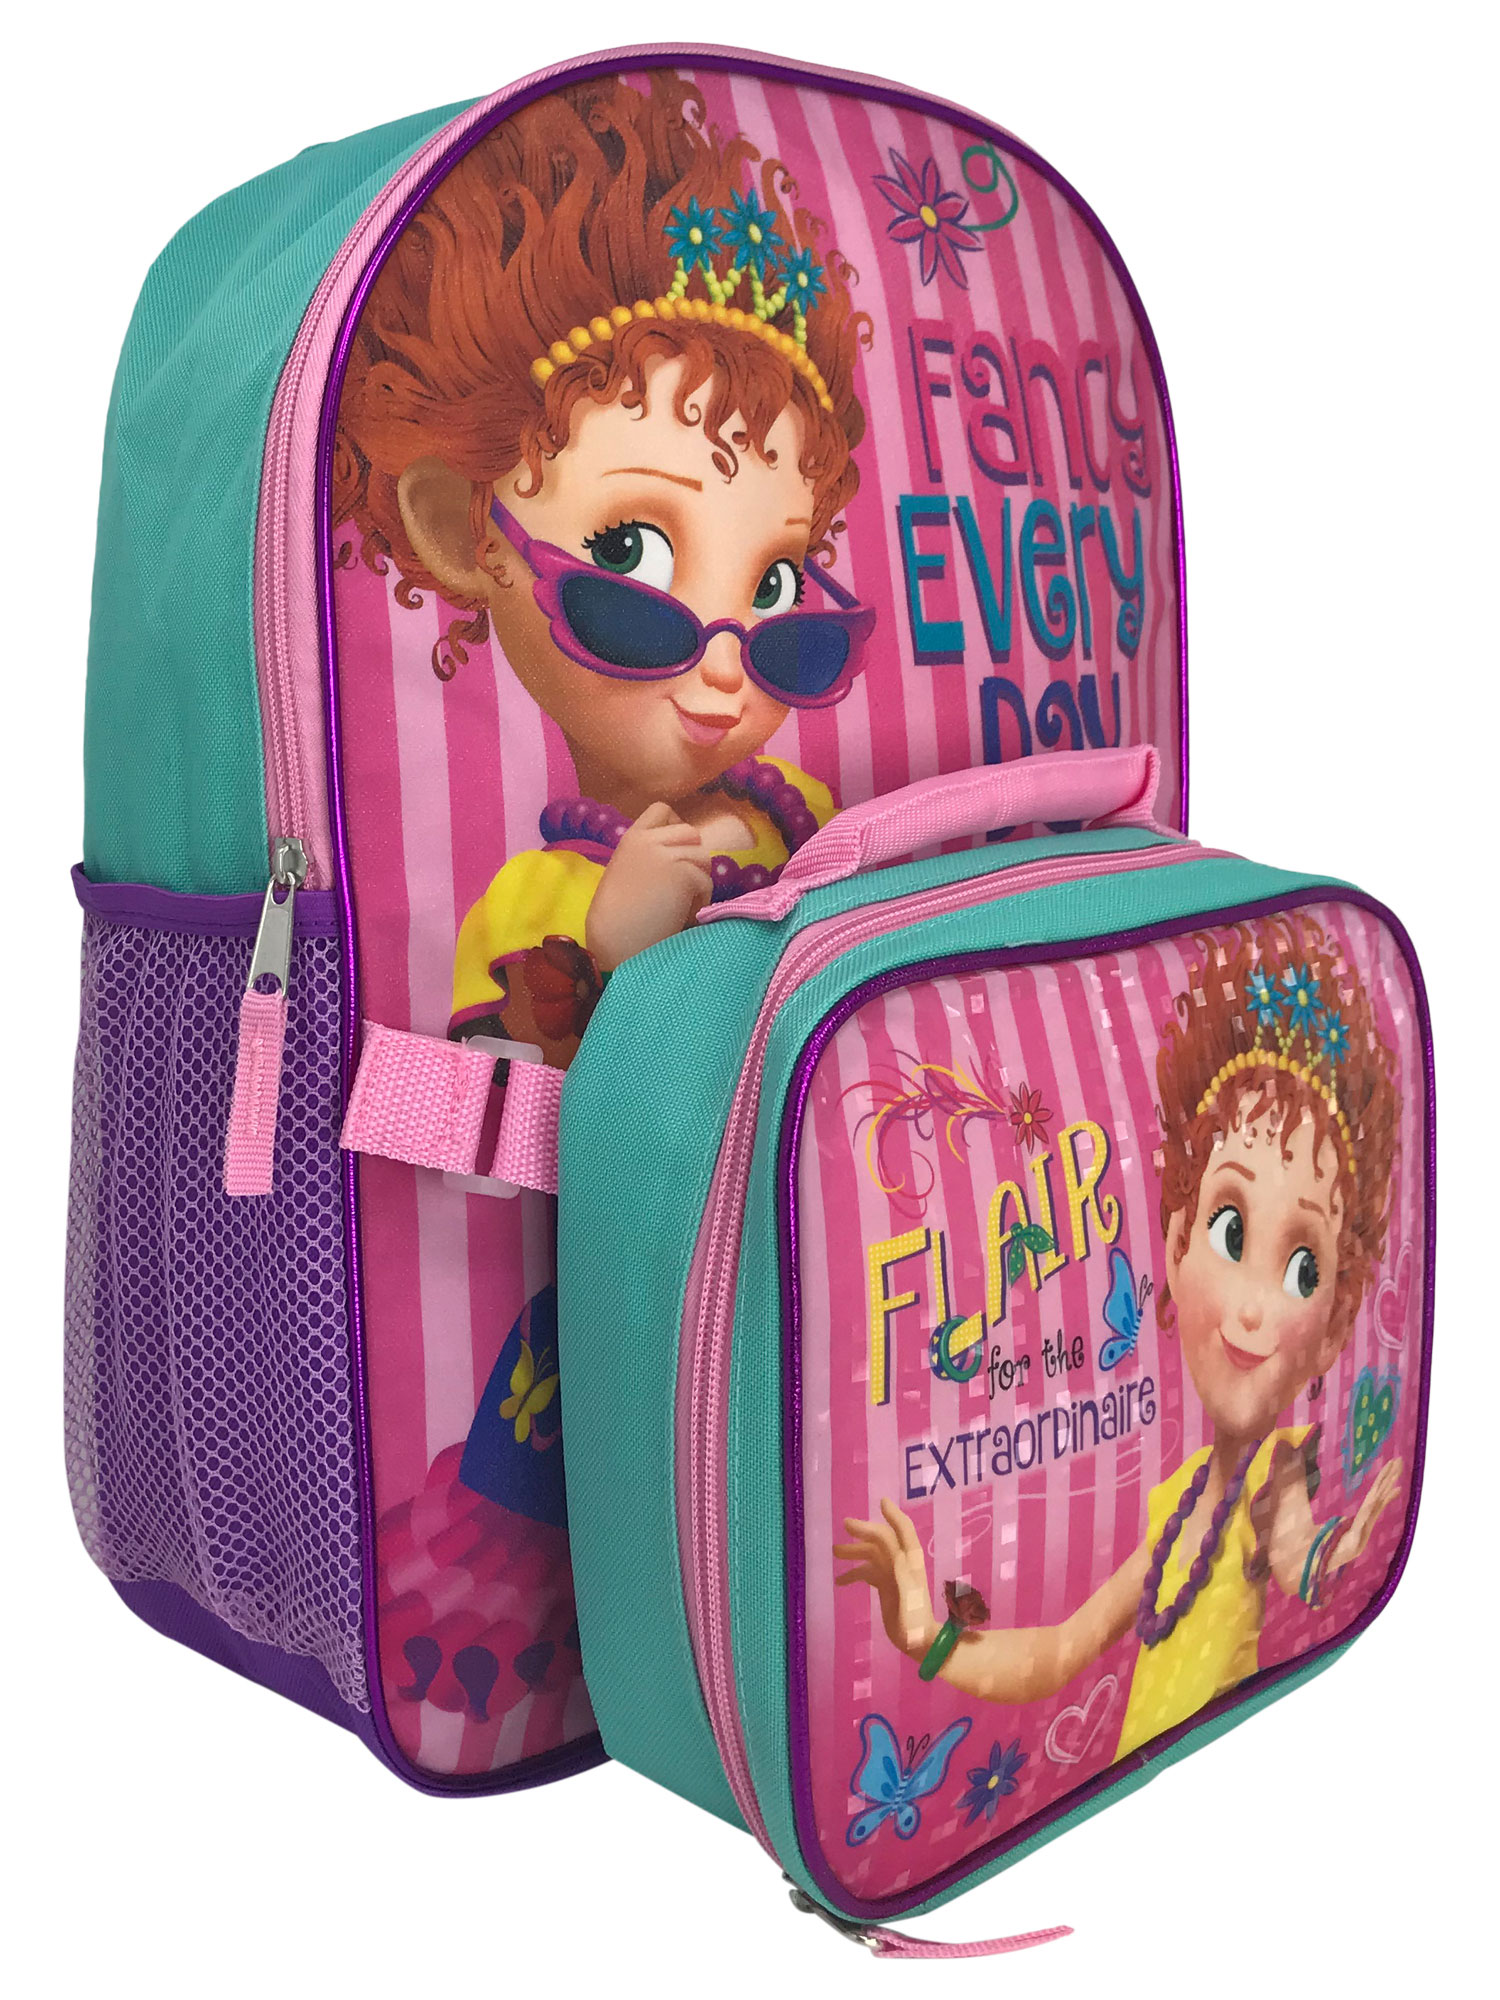 Girls Fancy Nancy Backpack 16" with Detachable Insulated Lunch Bag 2-Piece - image 1 of 6